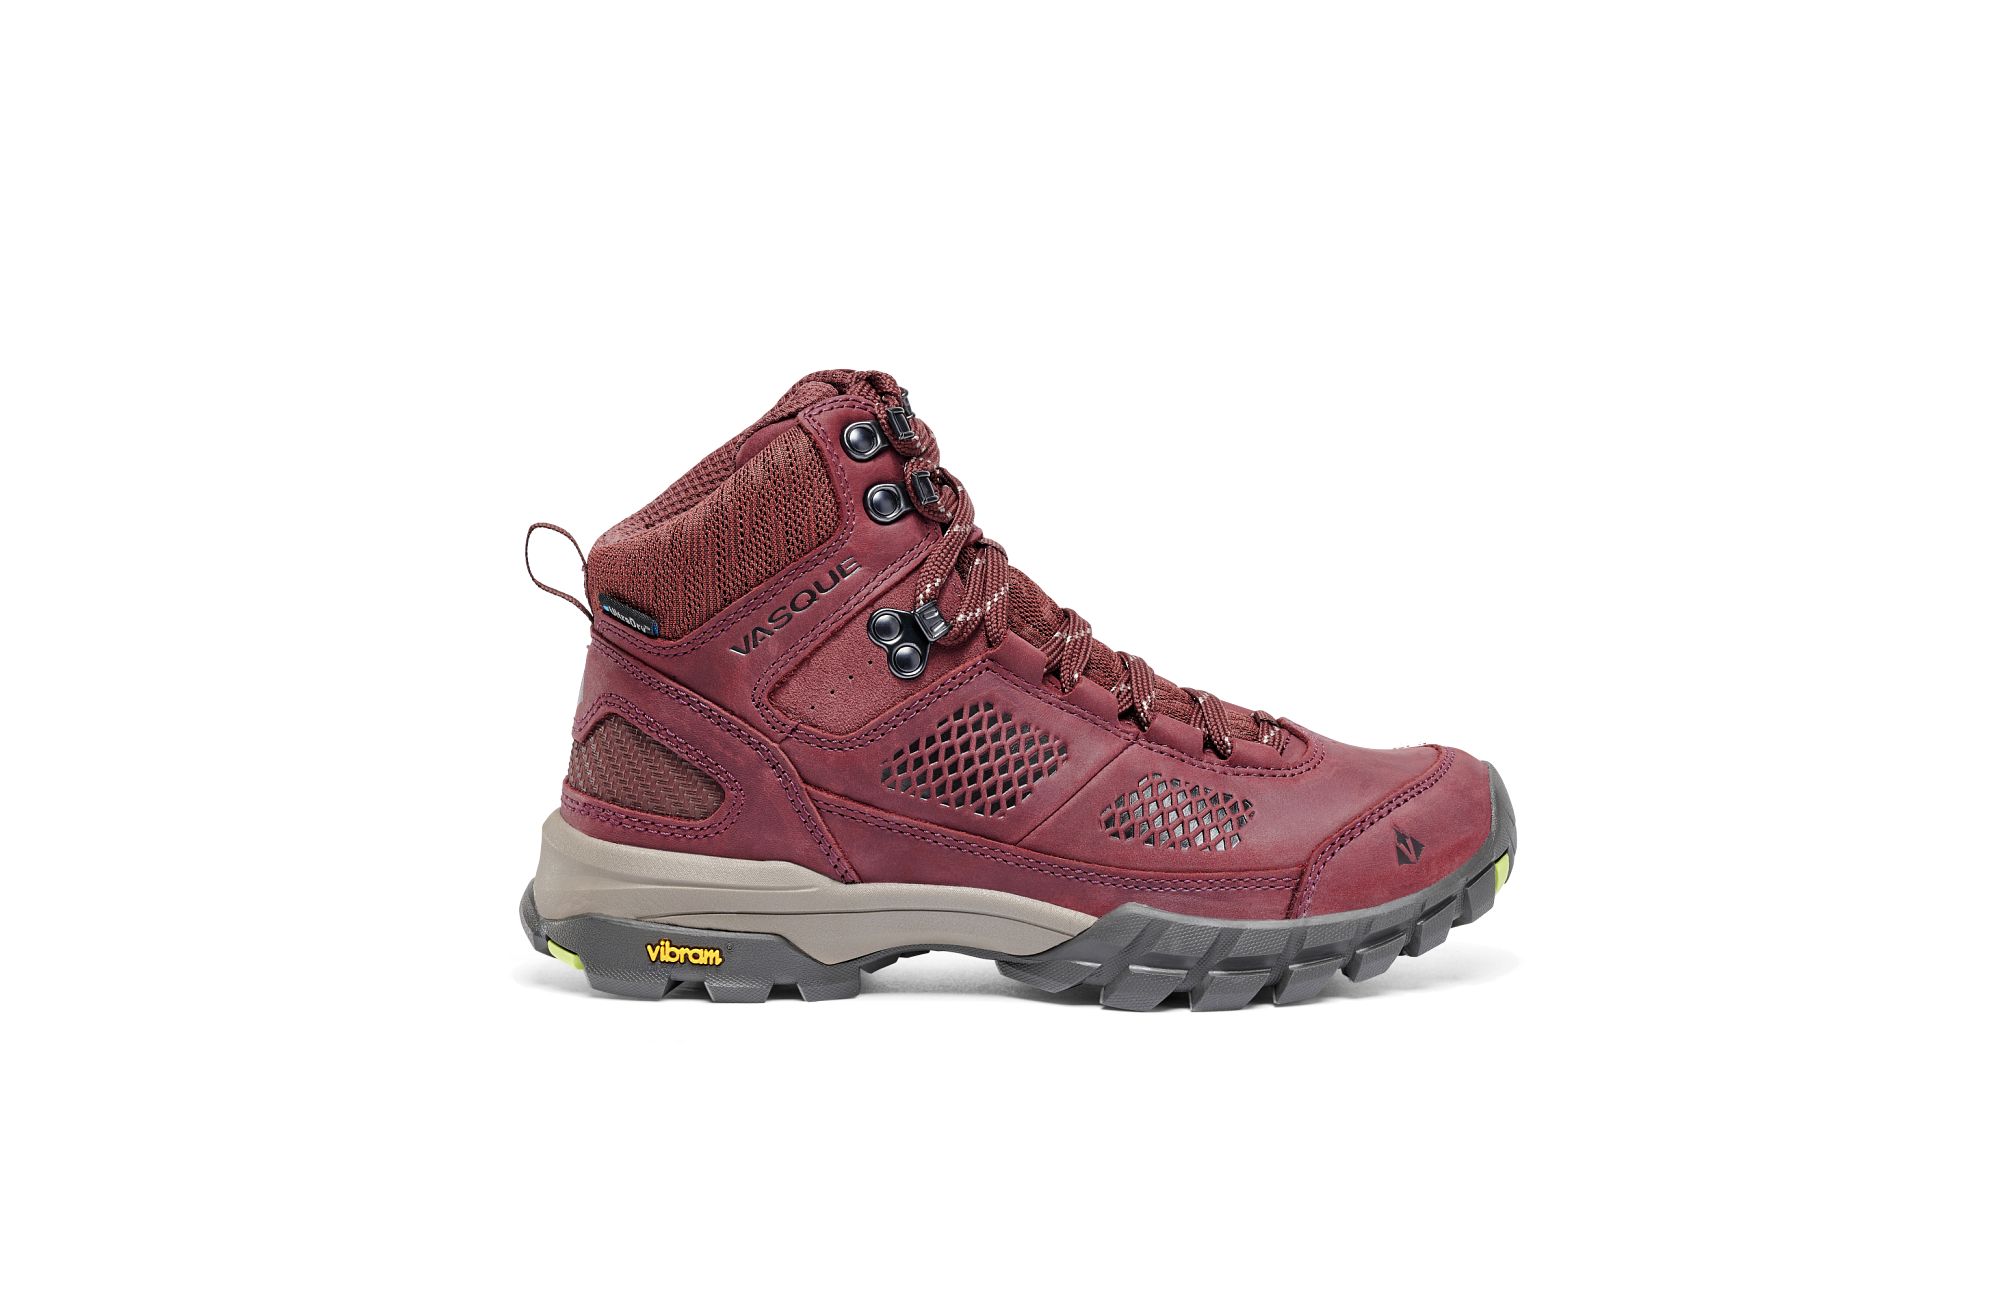 Women's Talus AT UltraDry™ Hiking Boot 7385 | Vasque